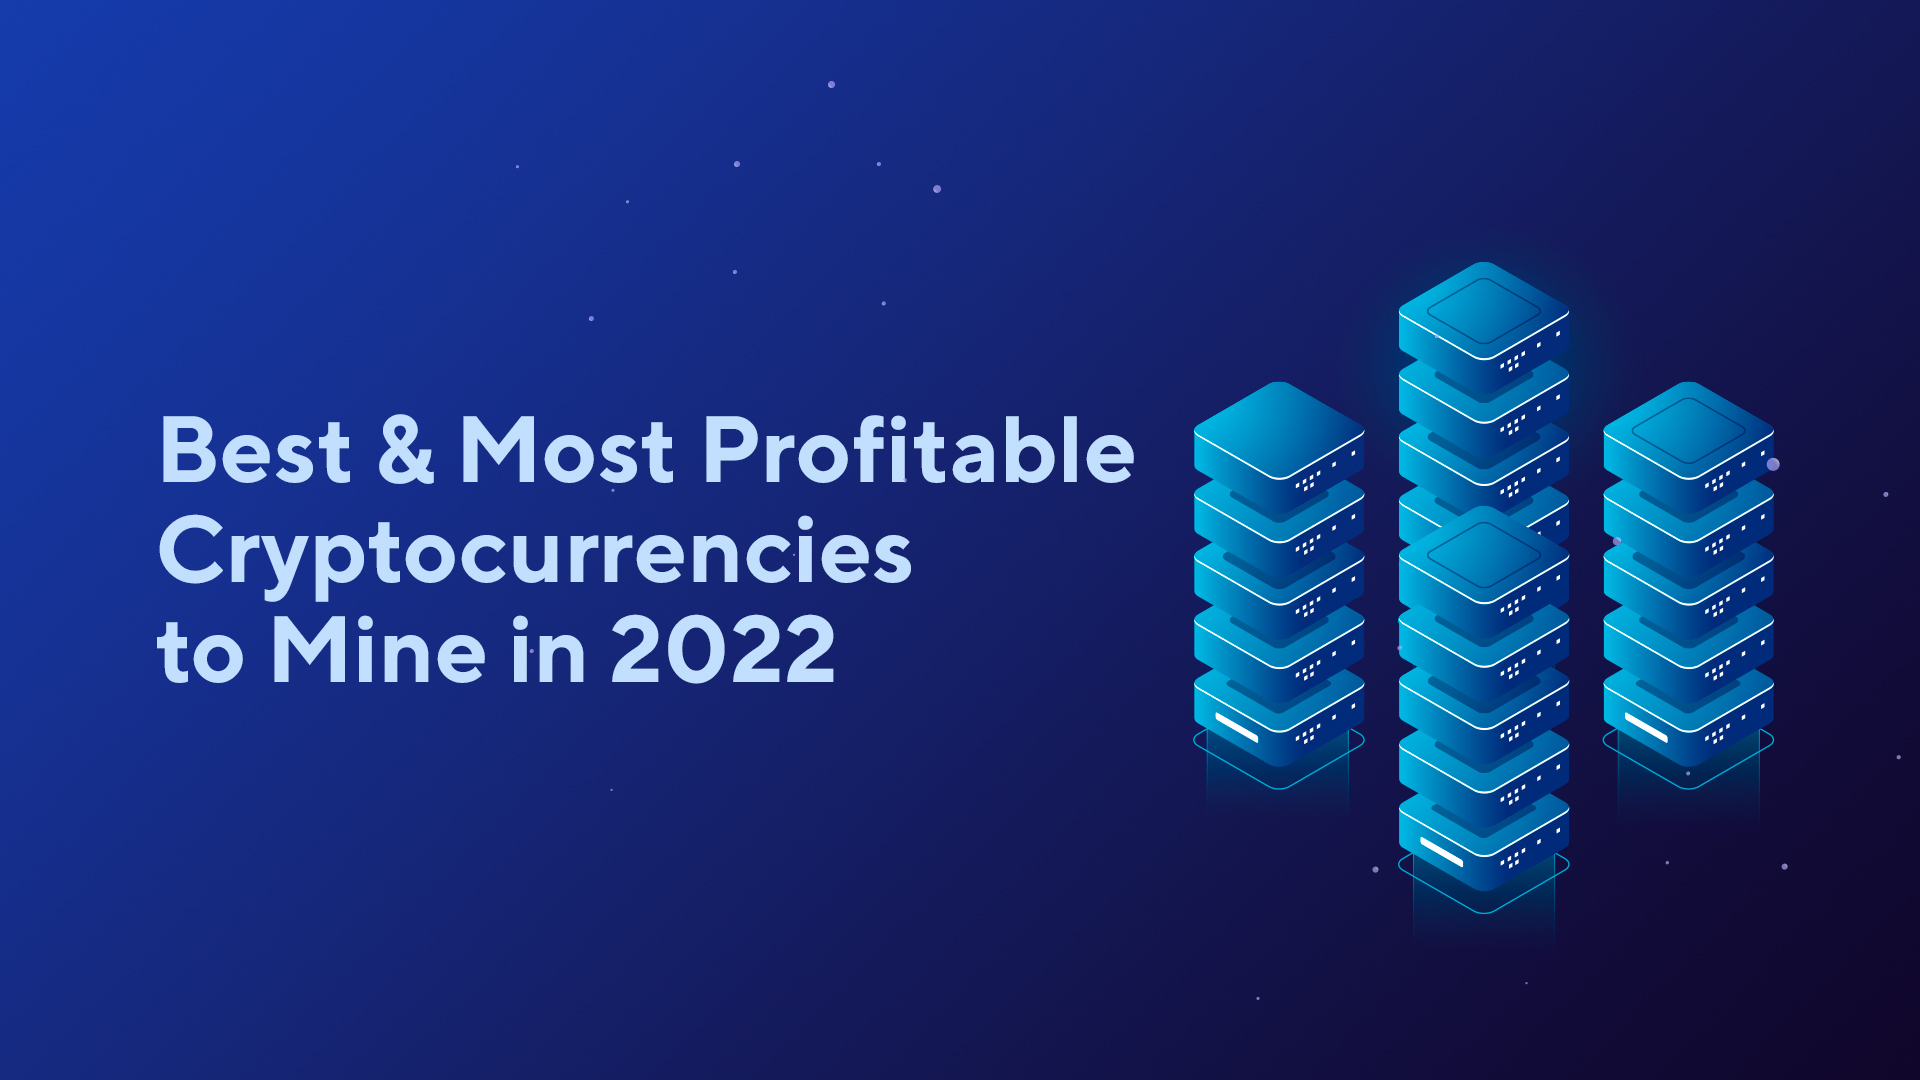 Best & Most Profitable Cryptocurrencies to Mine in 2022